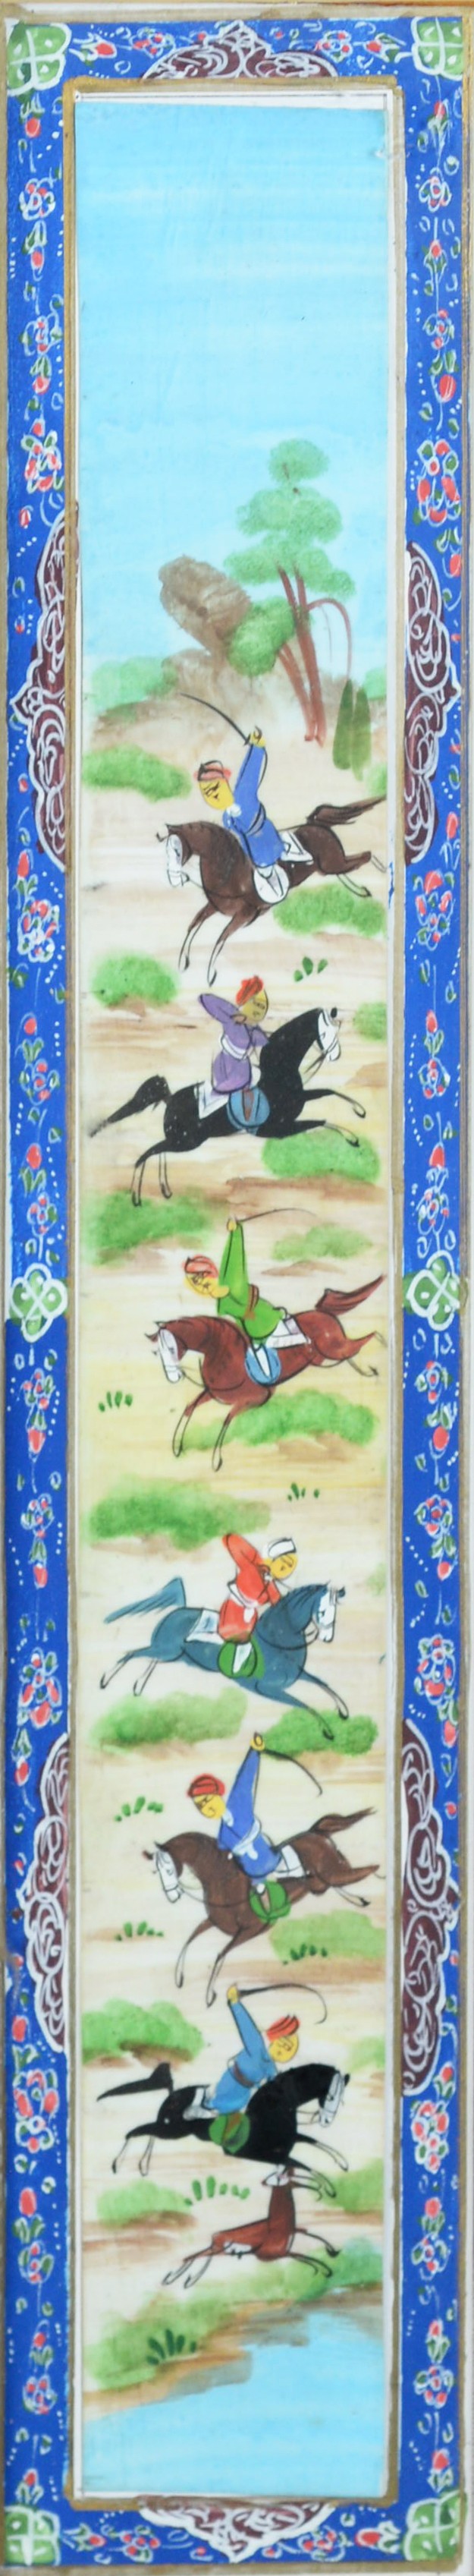 PAIR OF INDIAN GOUACHE DRAWINGS ON PAPER, EACH OF TWO WARRIORS, ONE ON HORSEBACK, within embroidered - Image 7 of 8